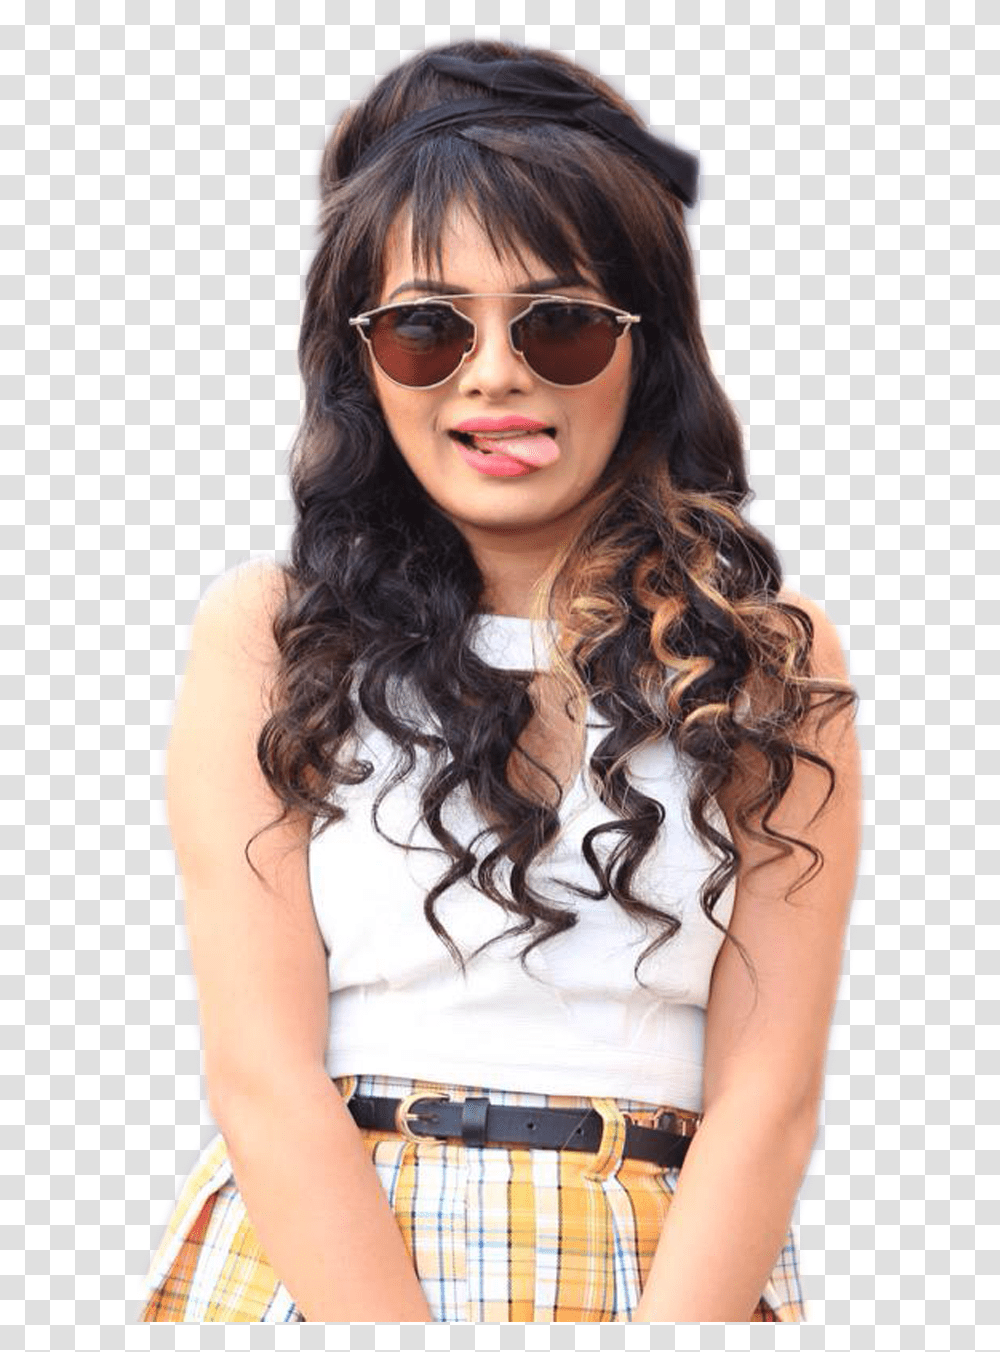 Free Images Girl Hd All, Face, Person, Sunglasses, Accessories Transparent Png